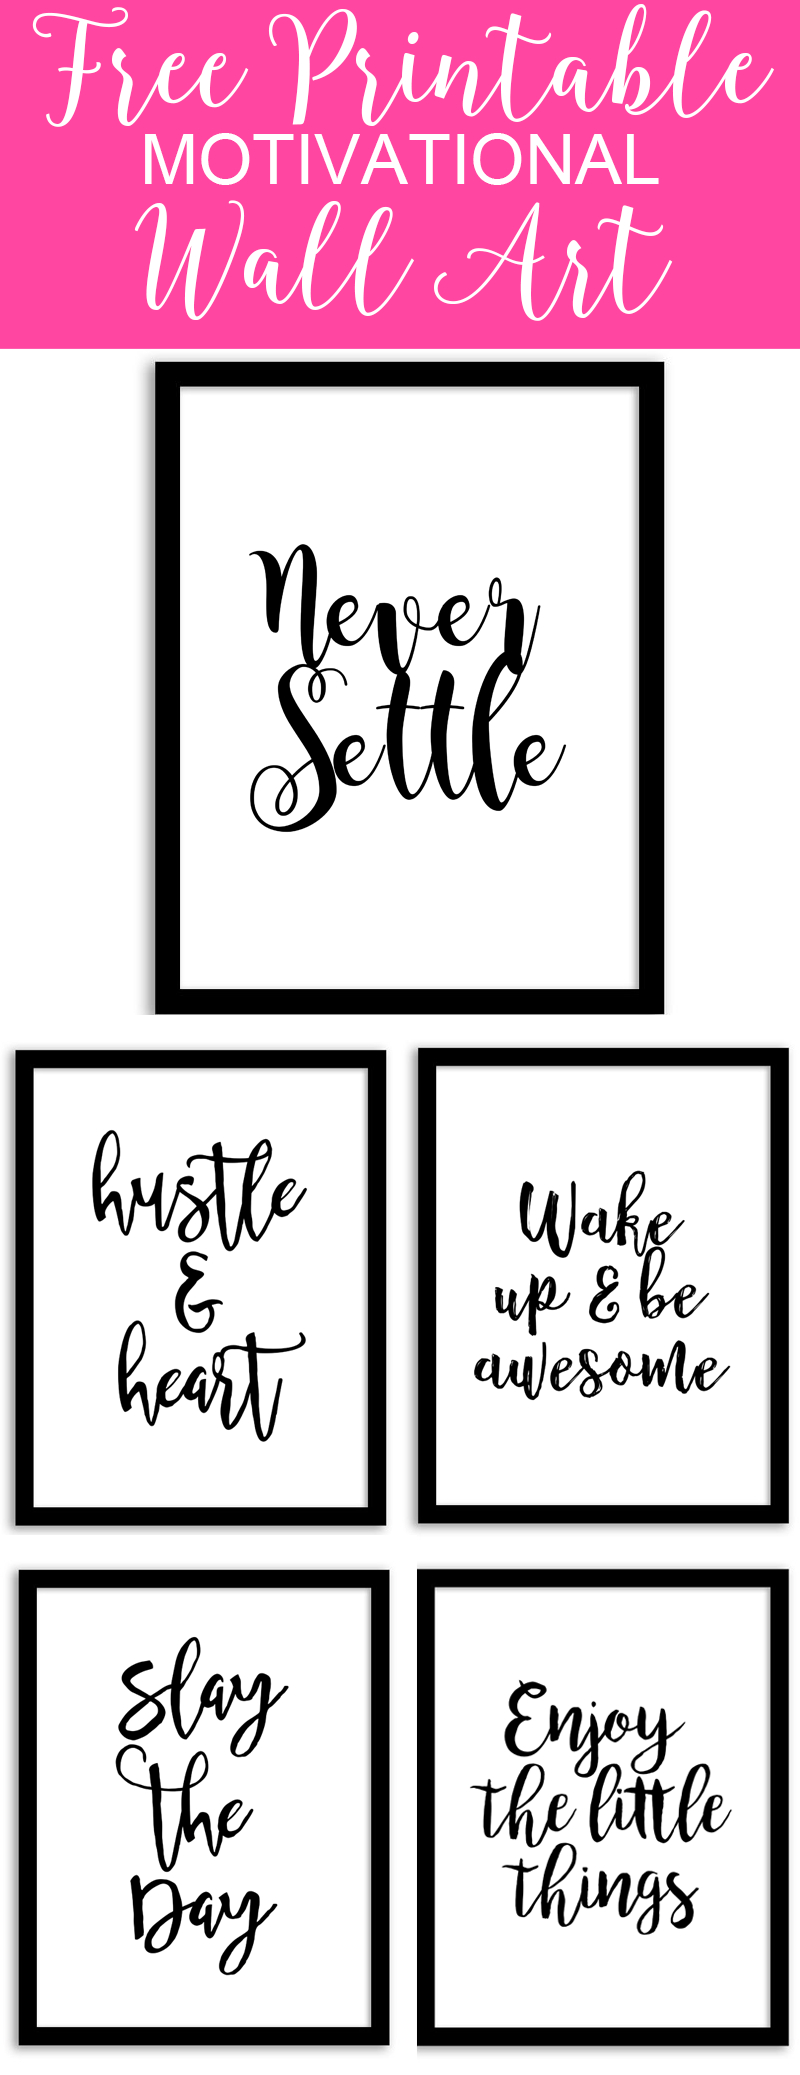 Free Printable Wall Art From @chicfetti - Perfect For Your Office Of - Free Printable Funny Office Signs